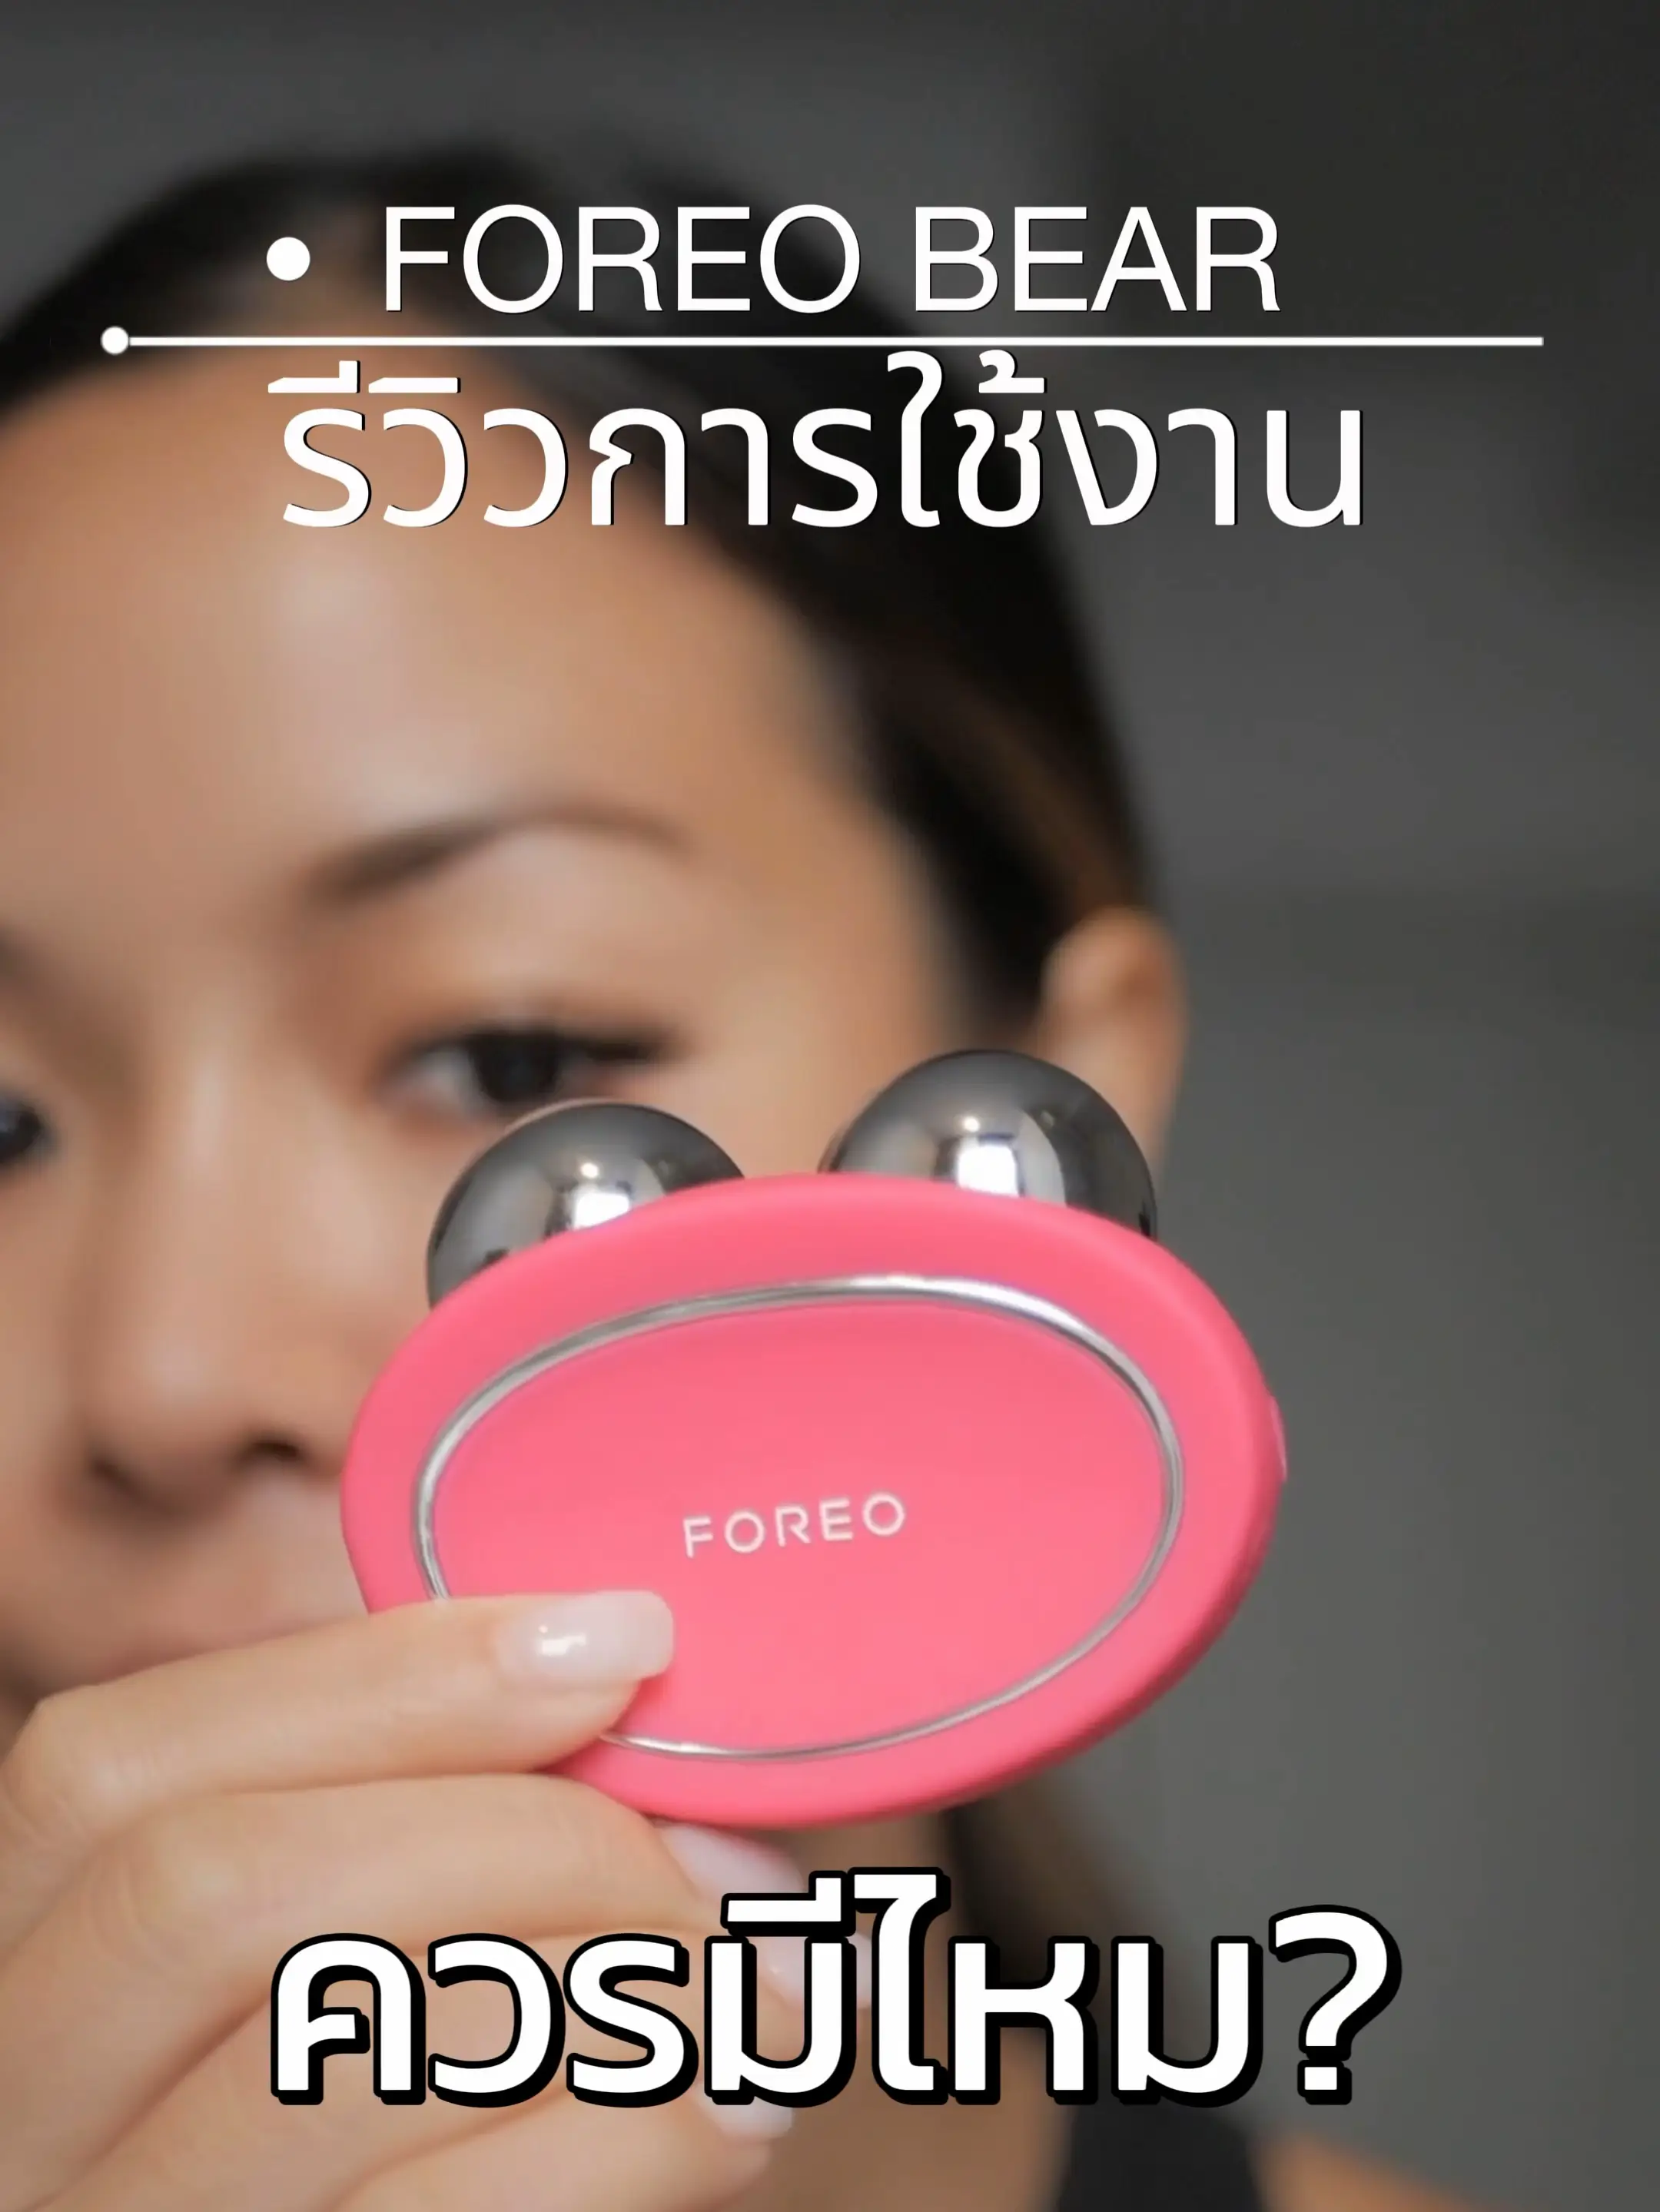 Foreo bear review, Video published by ปอวารีวิว